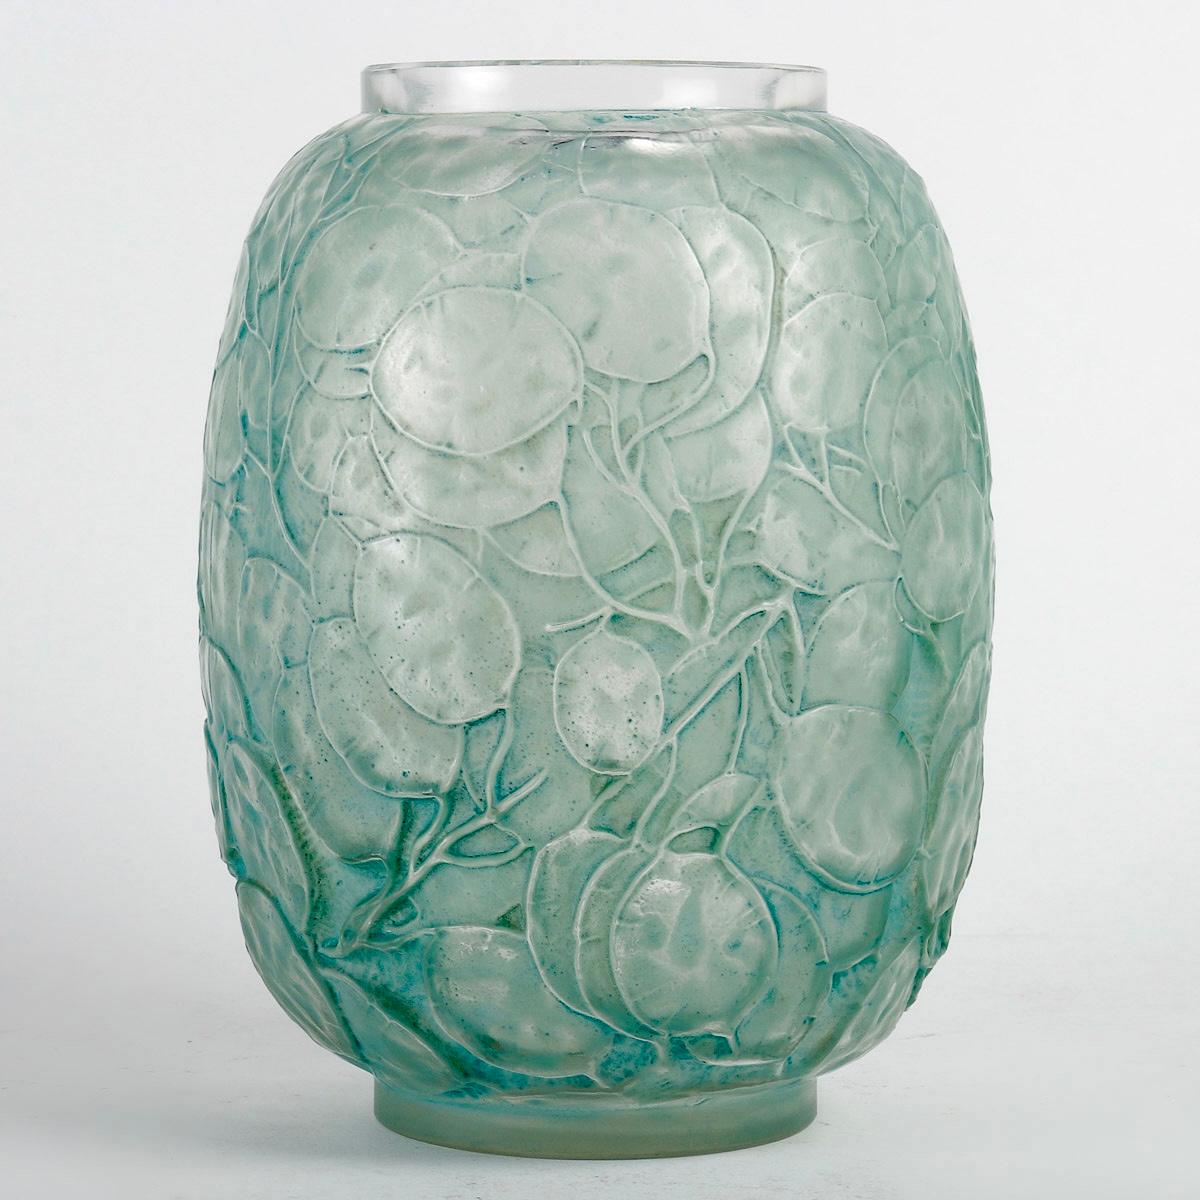 French 1914 René Lalique Vase Monnaie du Pape Frosted Glass with Green Patina